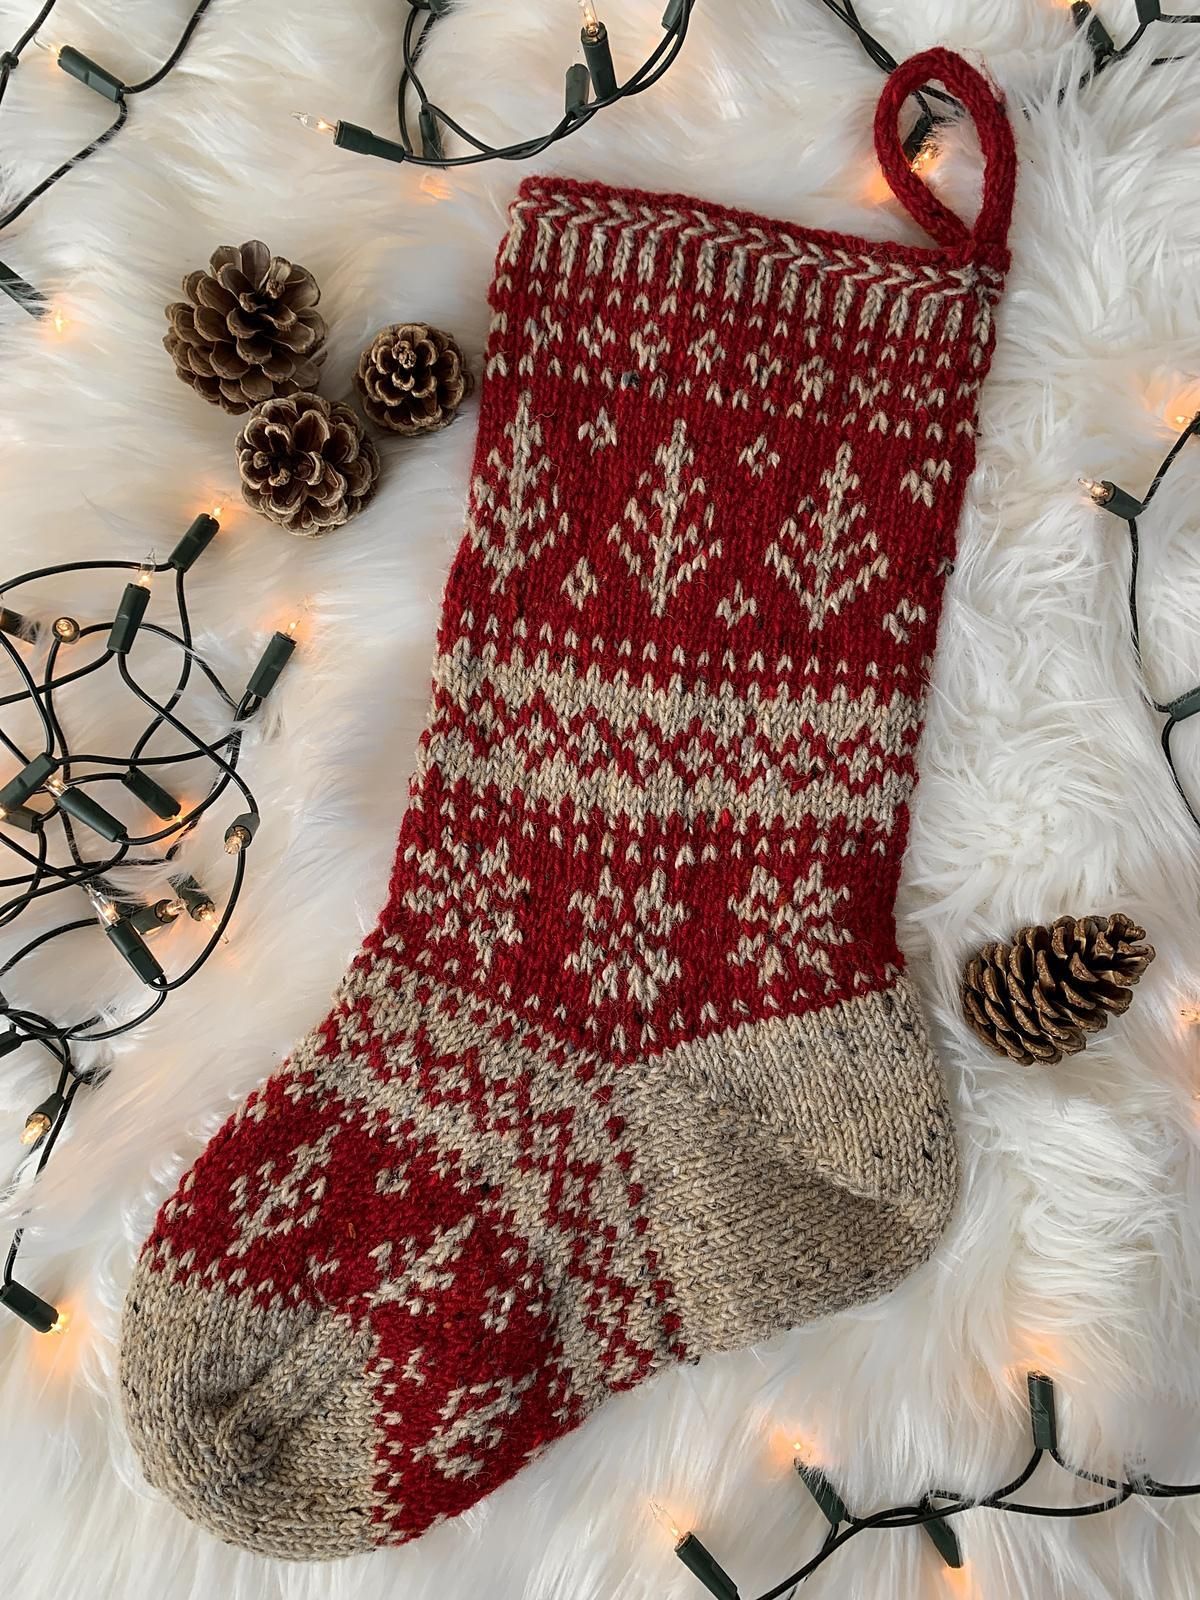 Get Festive with Stylish Knit Christmas
Stockings: Cozy and Chic